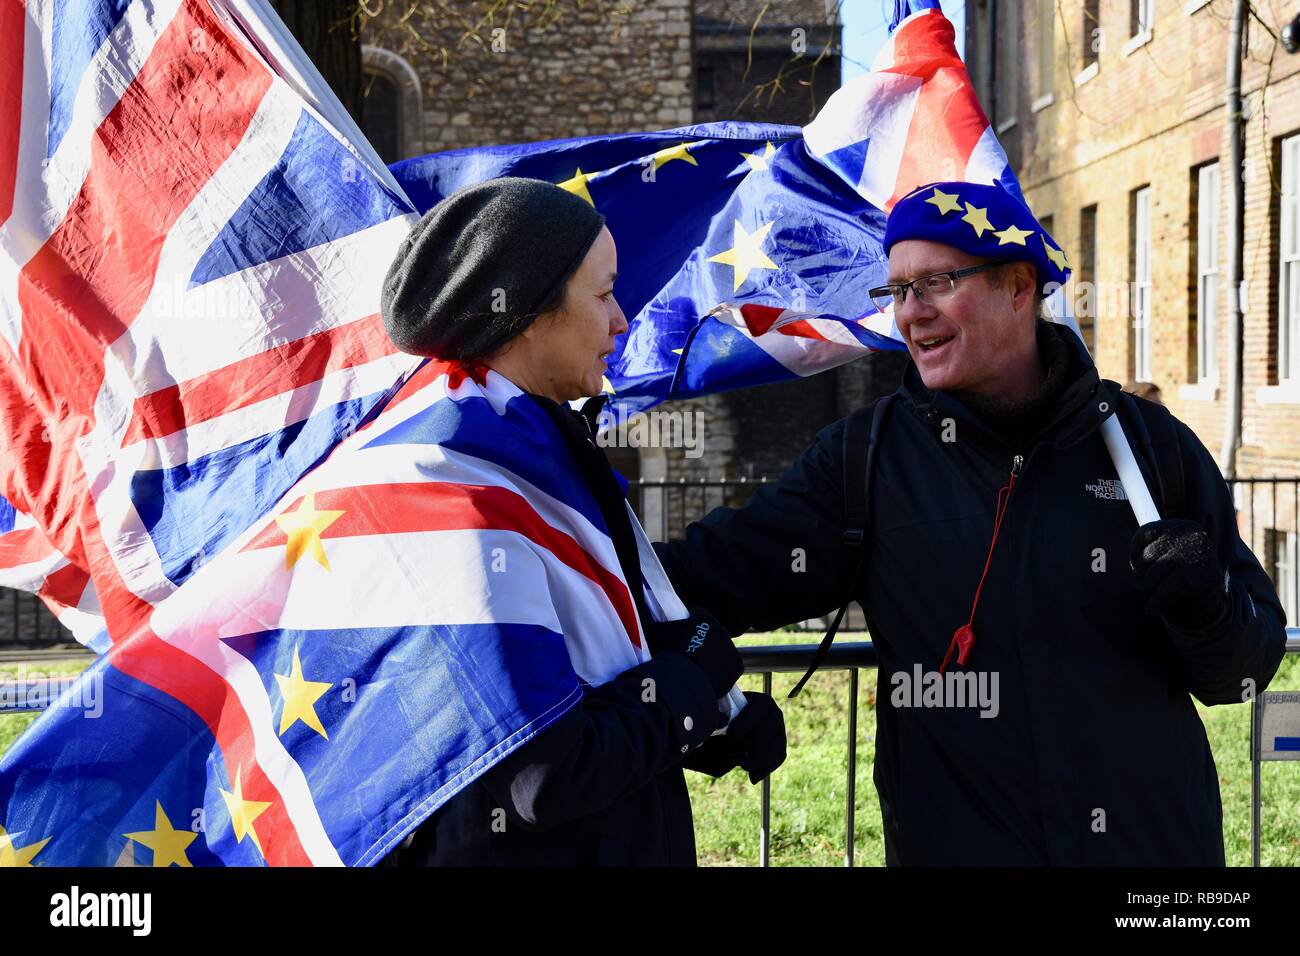 Westminster, London, UK. 8th Jan 2019. Pro EU Remainers demonstrated outside of the Houses of Parliament, Westminster, London.UK Credit: michael melia/Alamy Live News Stock Photo